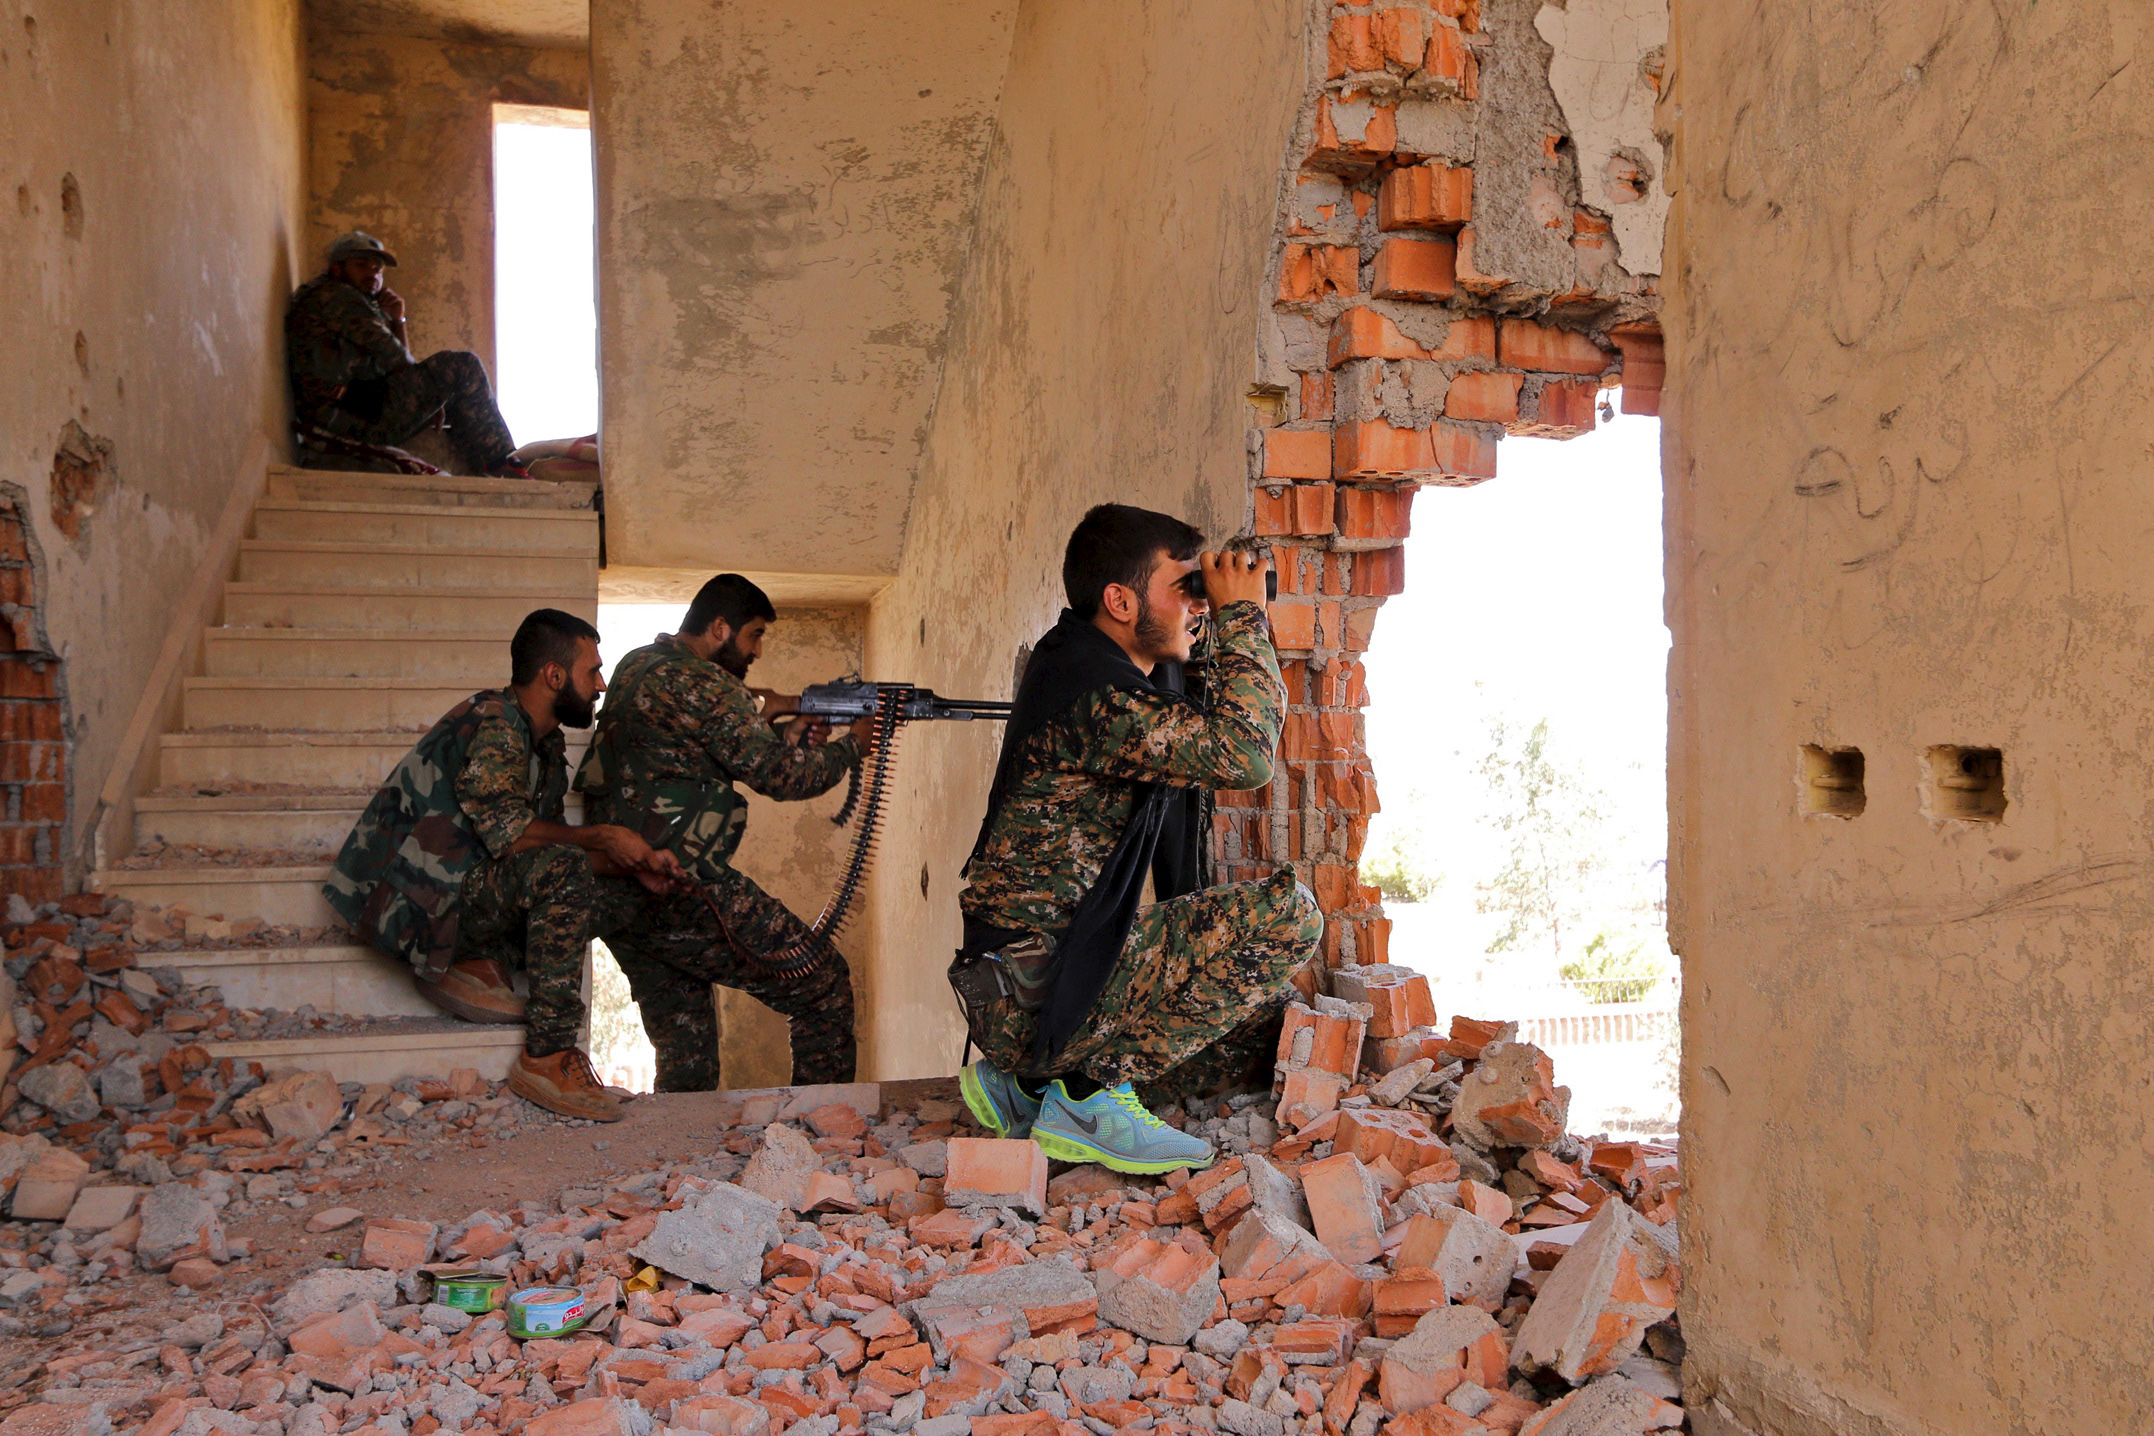 Kurdish People's Protection Units (YPG) fighters take up positions inside a damaged building in al-Vilat al-Homor neighborhood in Hasaka city, as they monitor the movements of Islamic State fighters who are stationed in Ghwayran neighborhood in Hasaka city, Syria on July 22, 2015. (Rodi Said—Reuters)